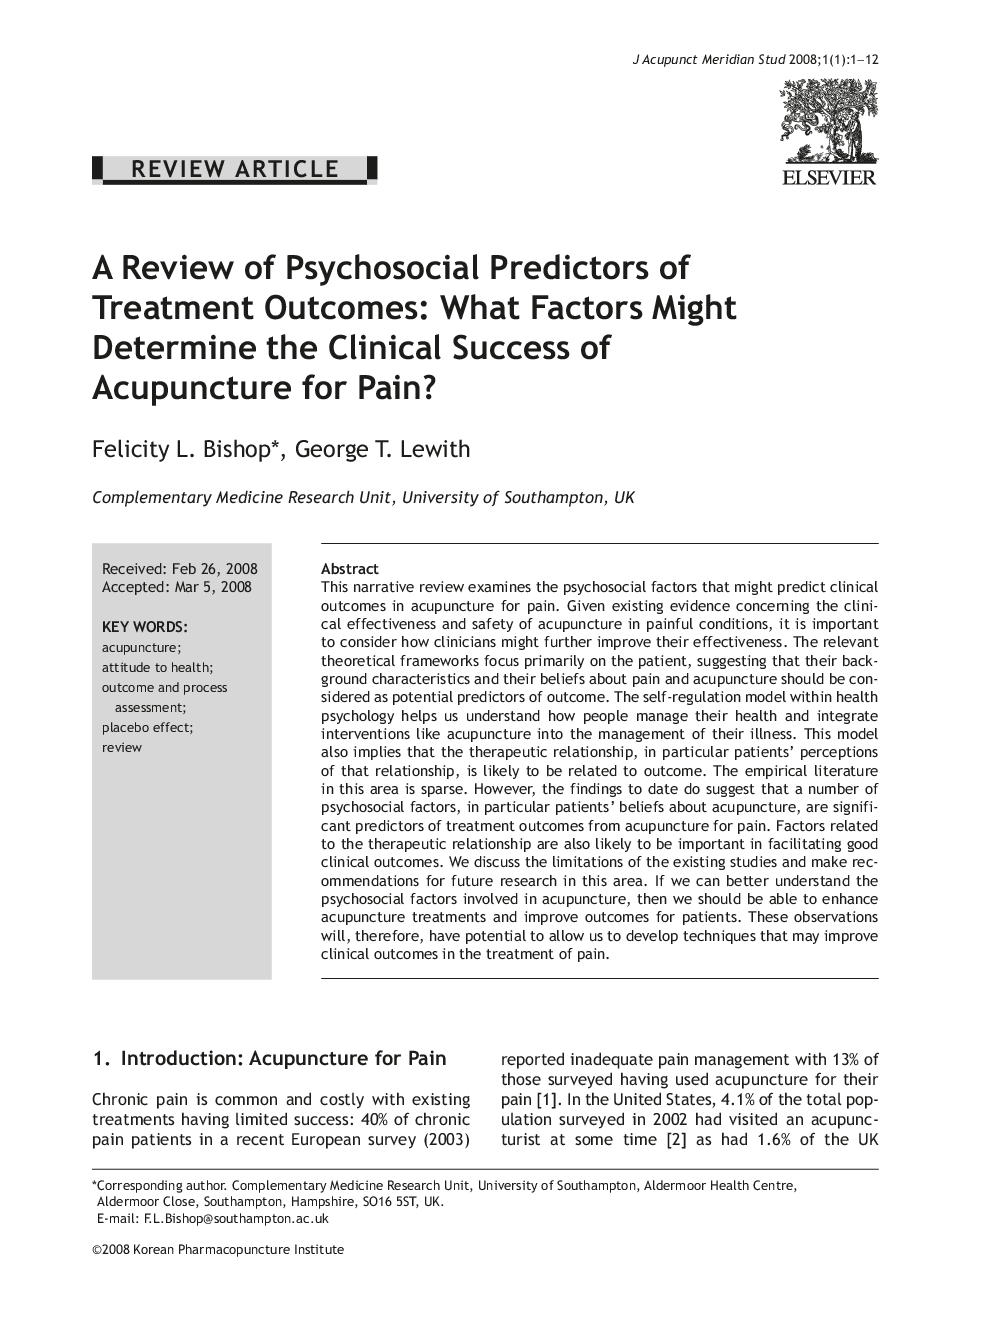 A Review of Psychosocial Predictors of Treatment Outcomes: What Factors Might Determine the Clinical Success of Acupuncture for Pain?